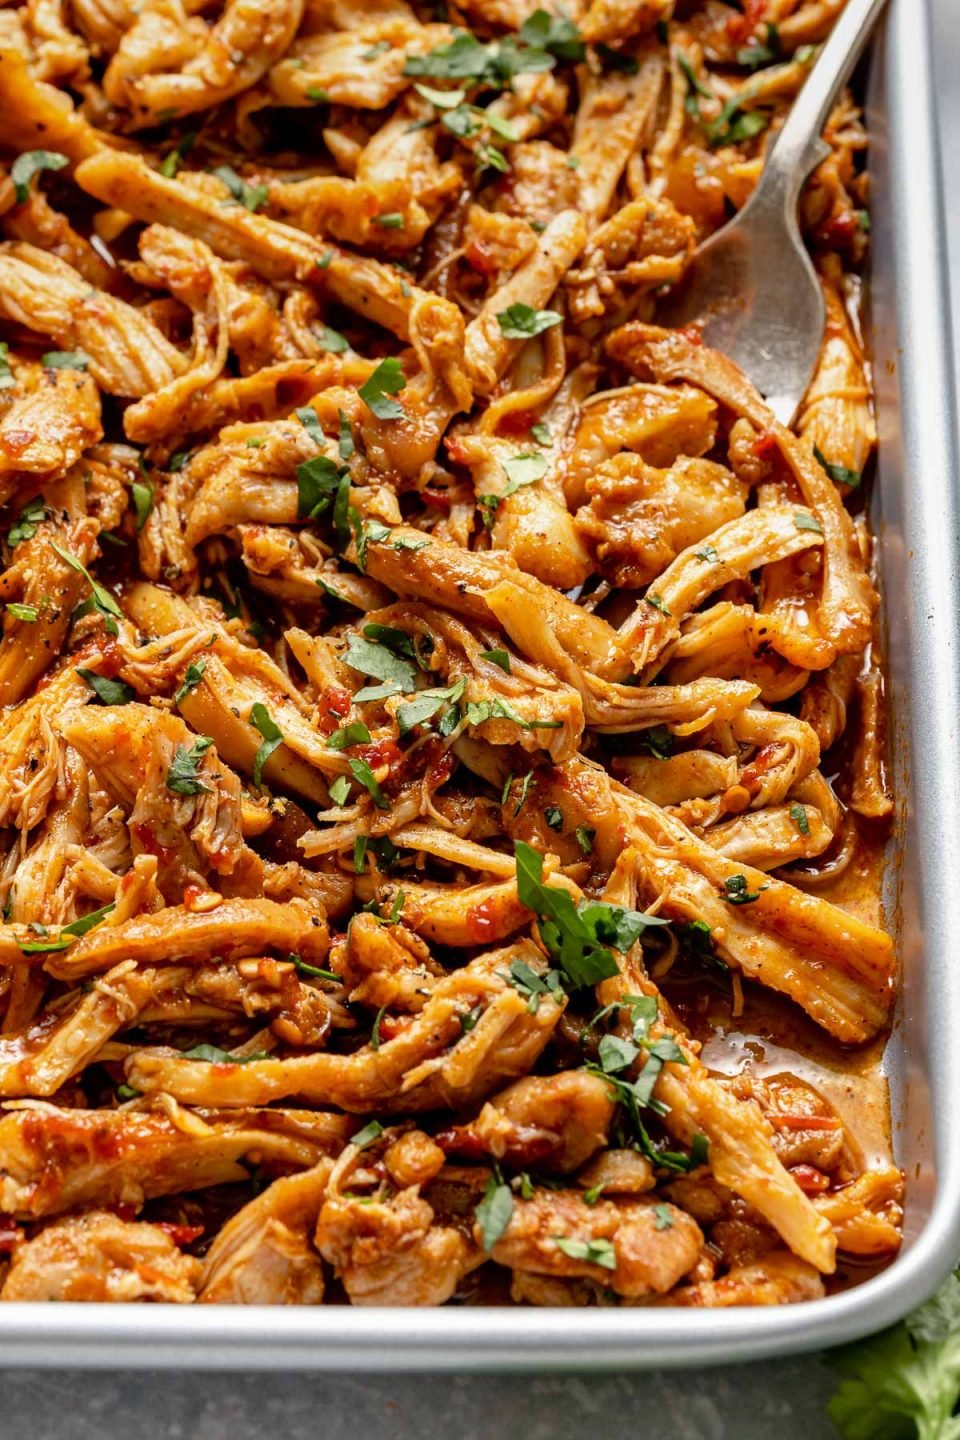 A silver fork scoops up shredded chipotle honey chicken on a small silver baking sheet a top a light blue textured surface. The shredded chicken is garnished with fresh chopped cilantro.